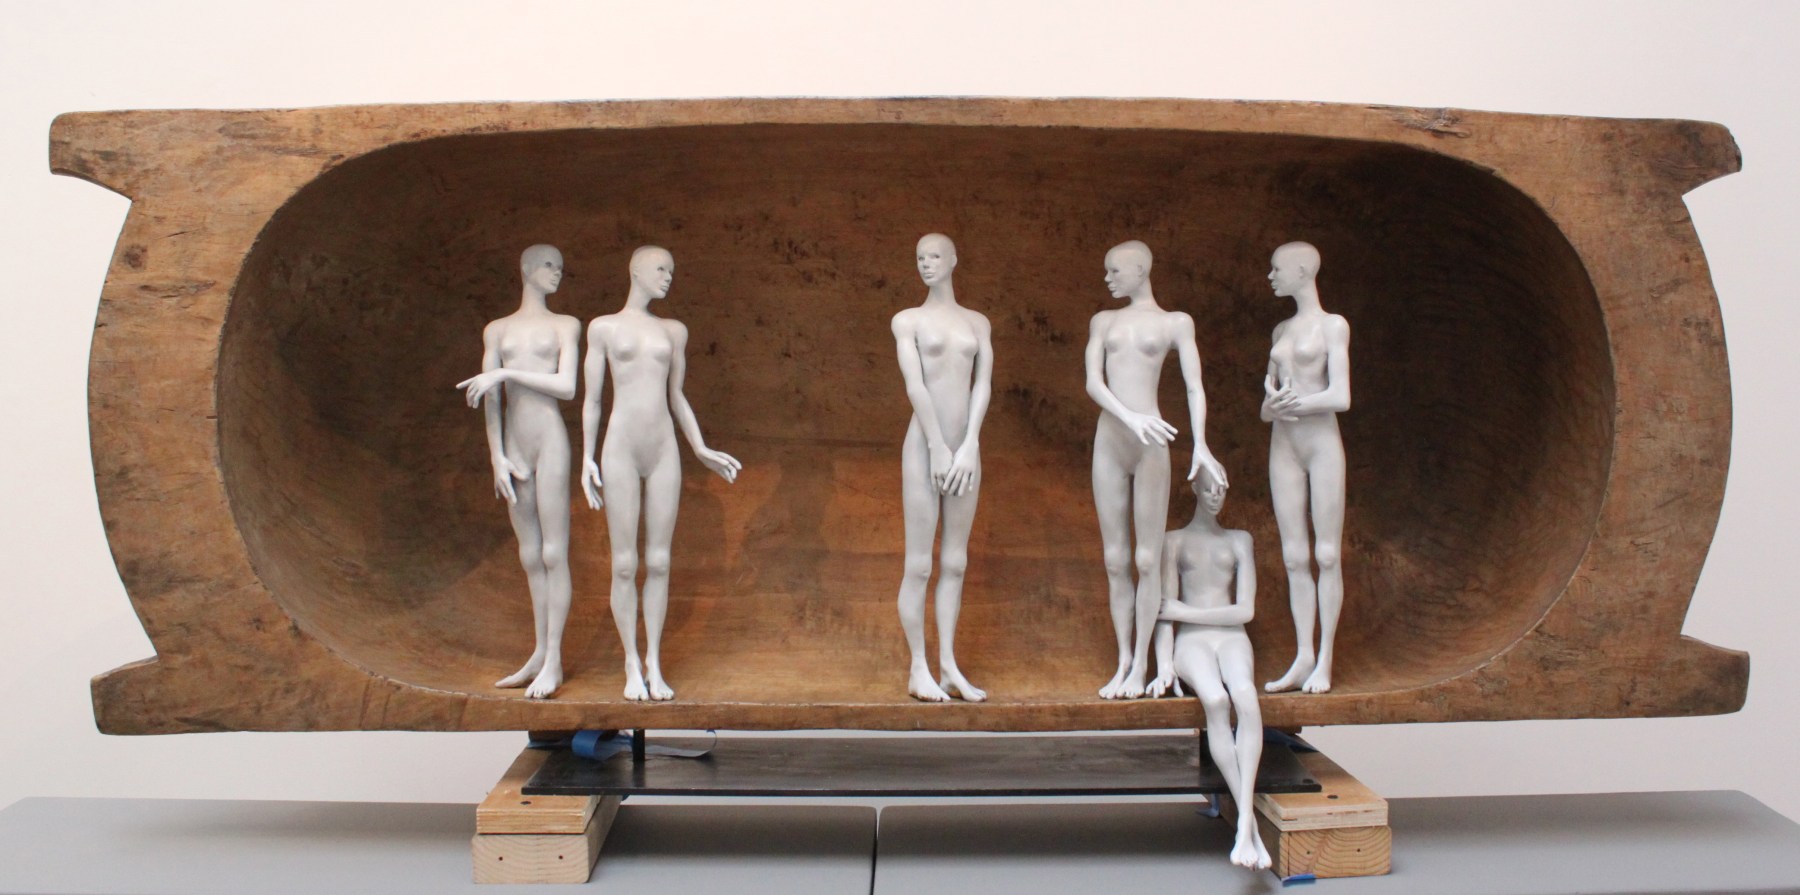 We have to go on, 2013     bronze, wood 22 x 52 x 15 inches;  55.9 x 132.1 x 38.1 centimeters LSFA# 13025